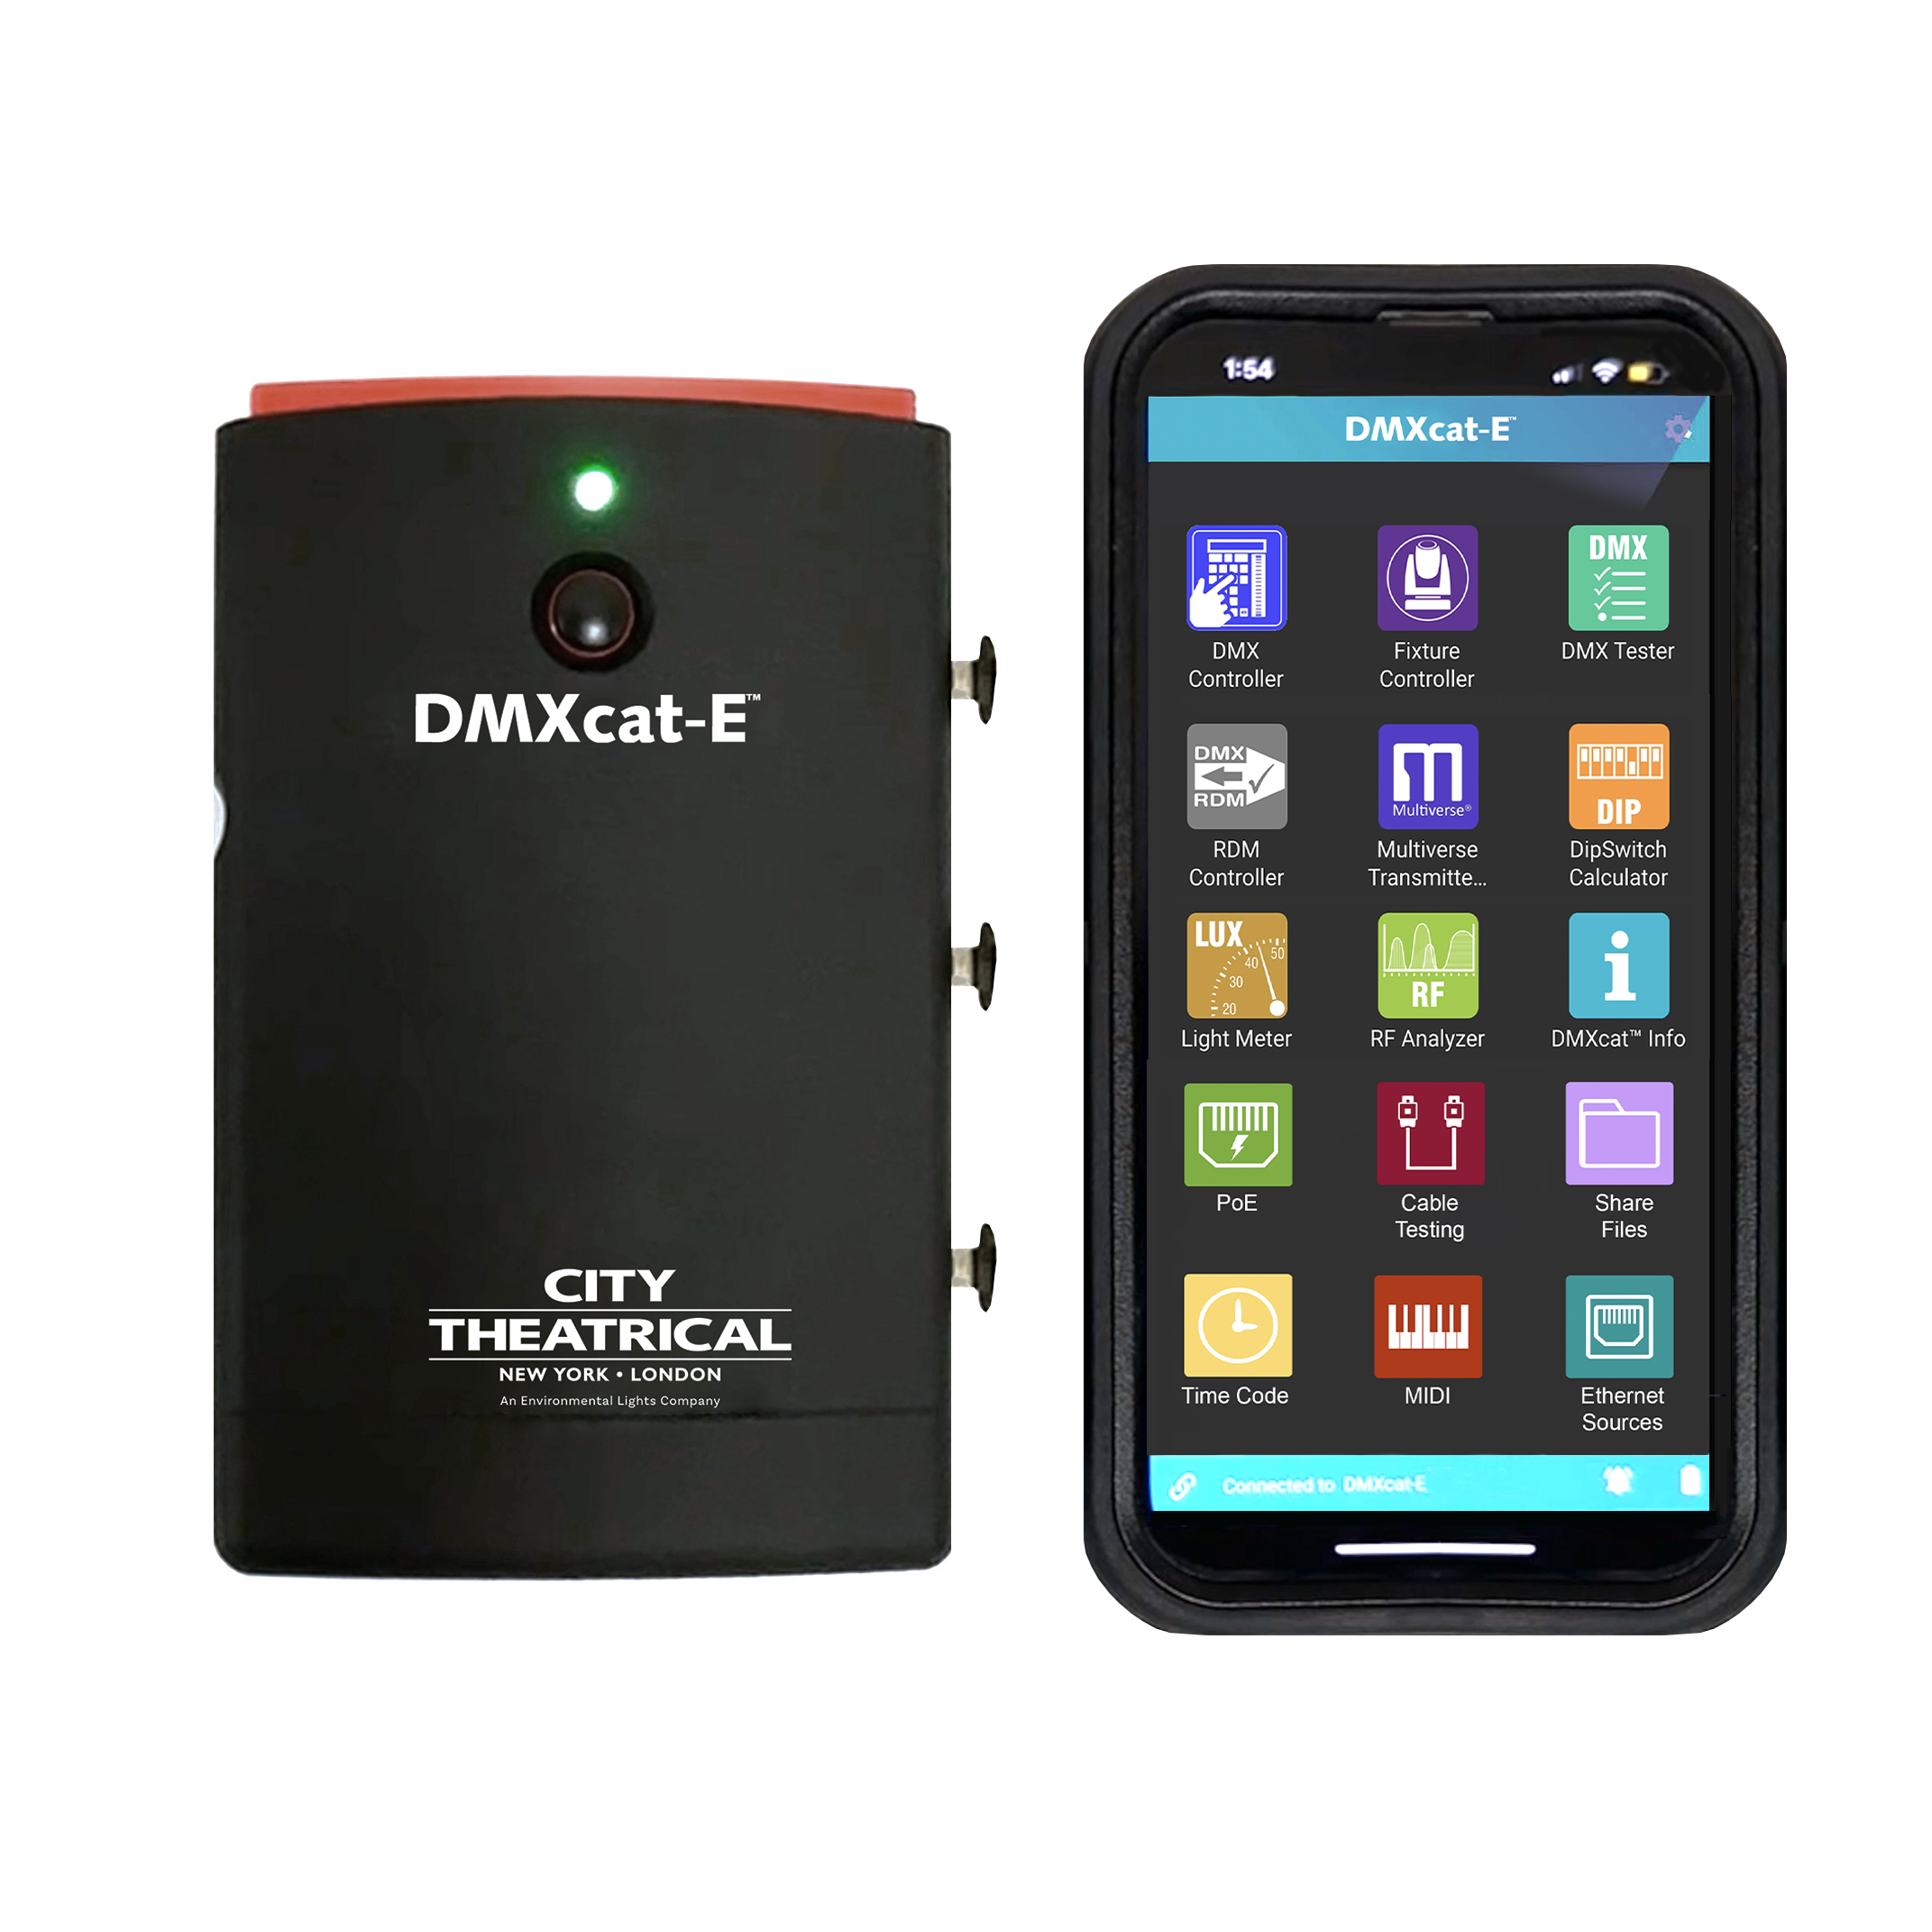 6100 DMXcat-E hardware and smartphone app